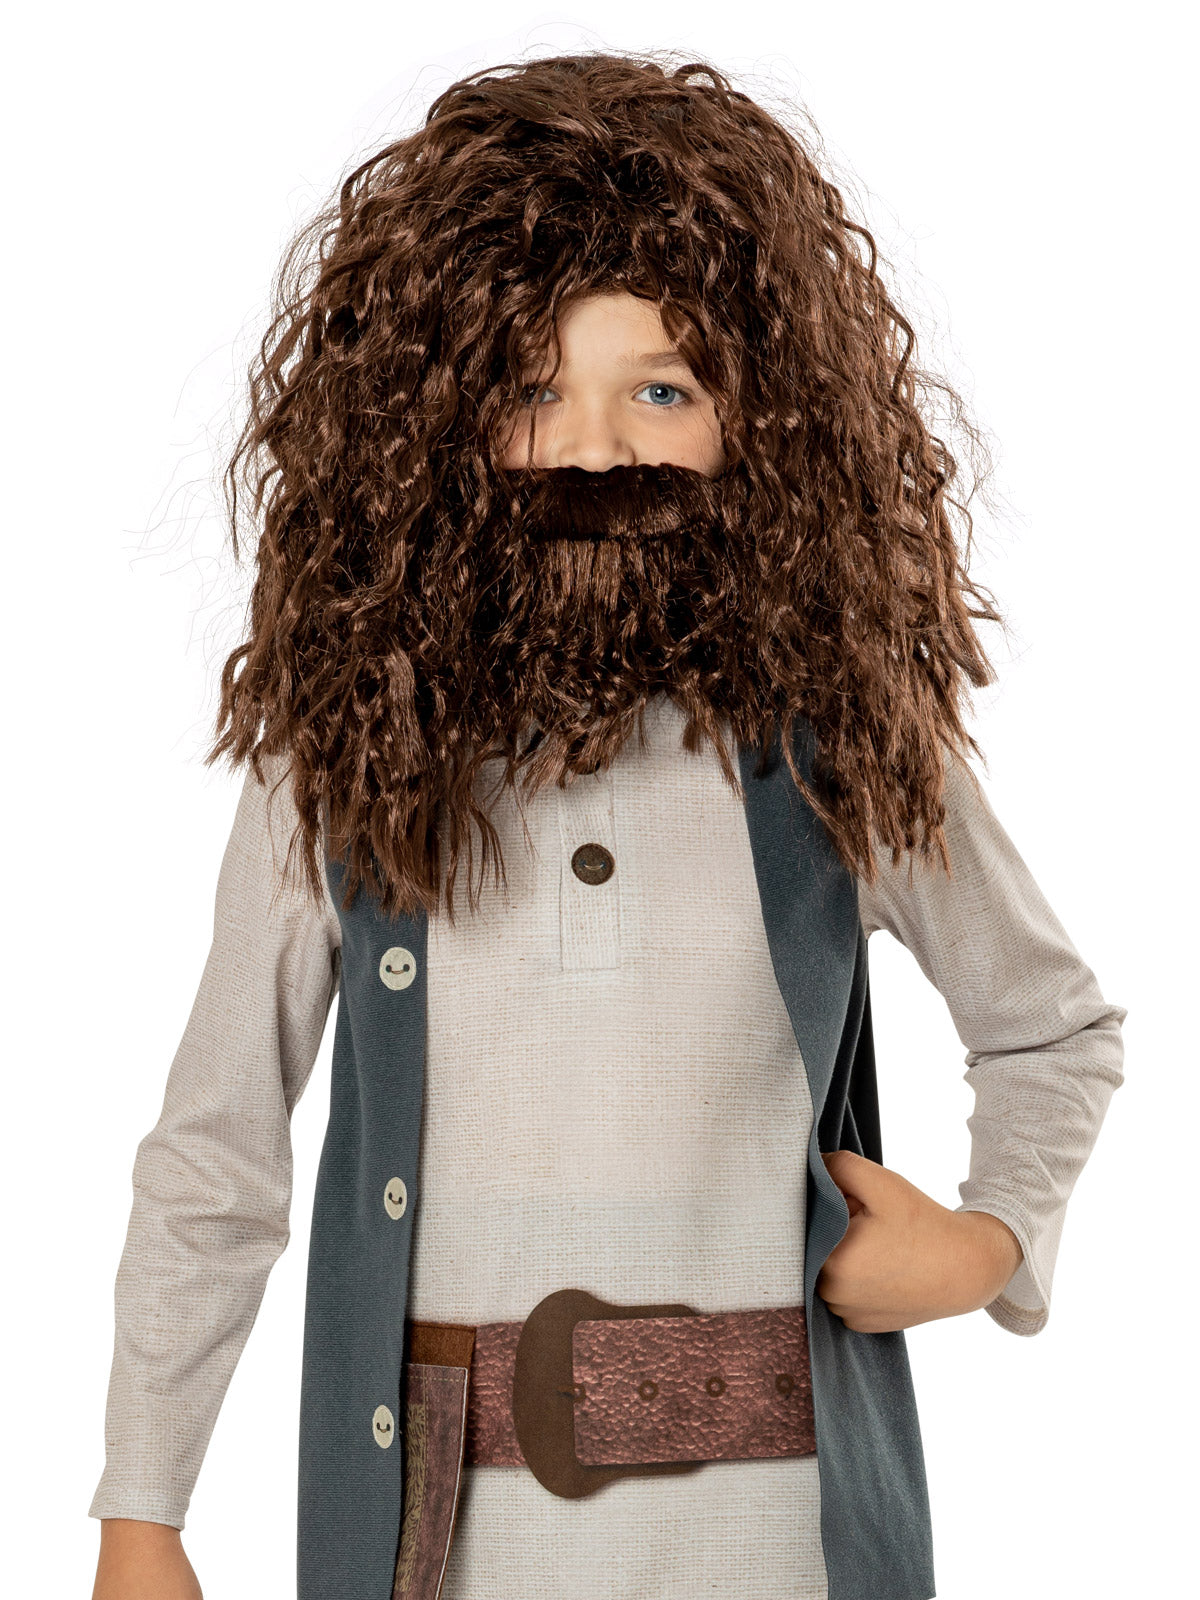 Hagrid Child Harry Potter Boys Costume Licensed with wig and beard